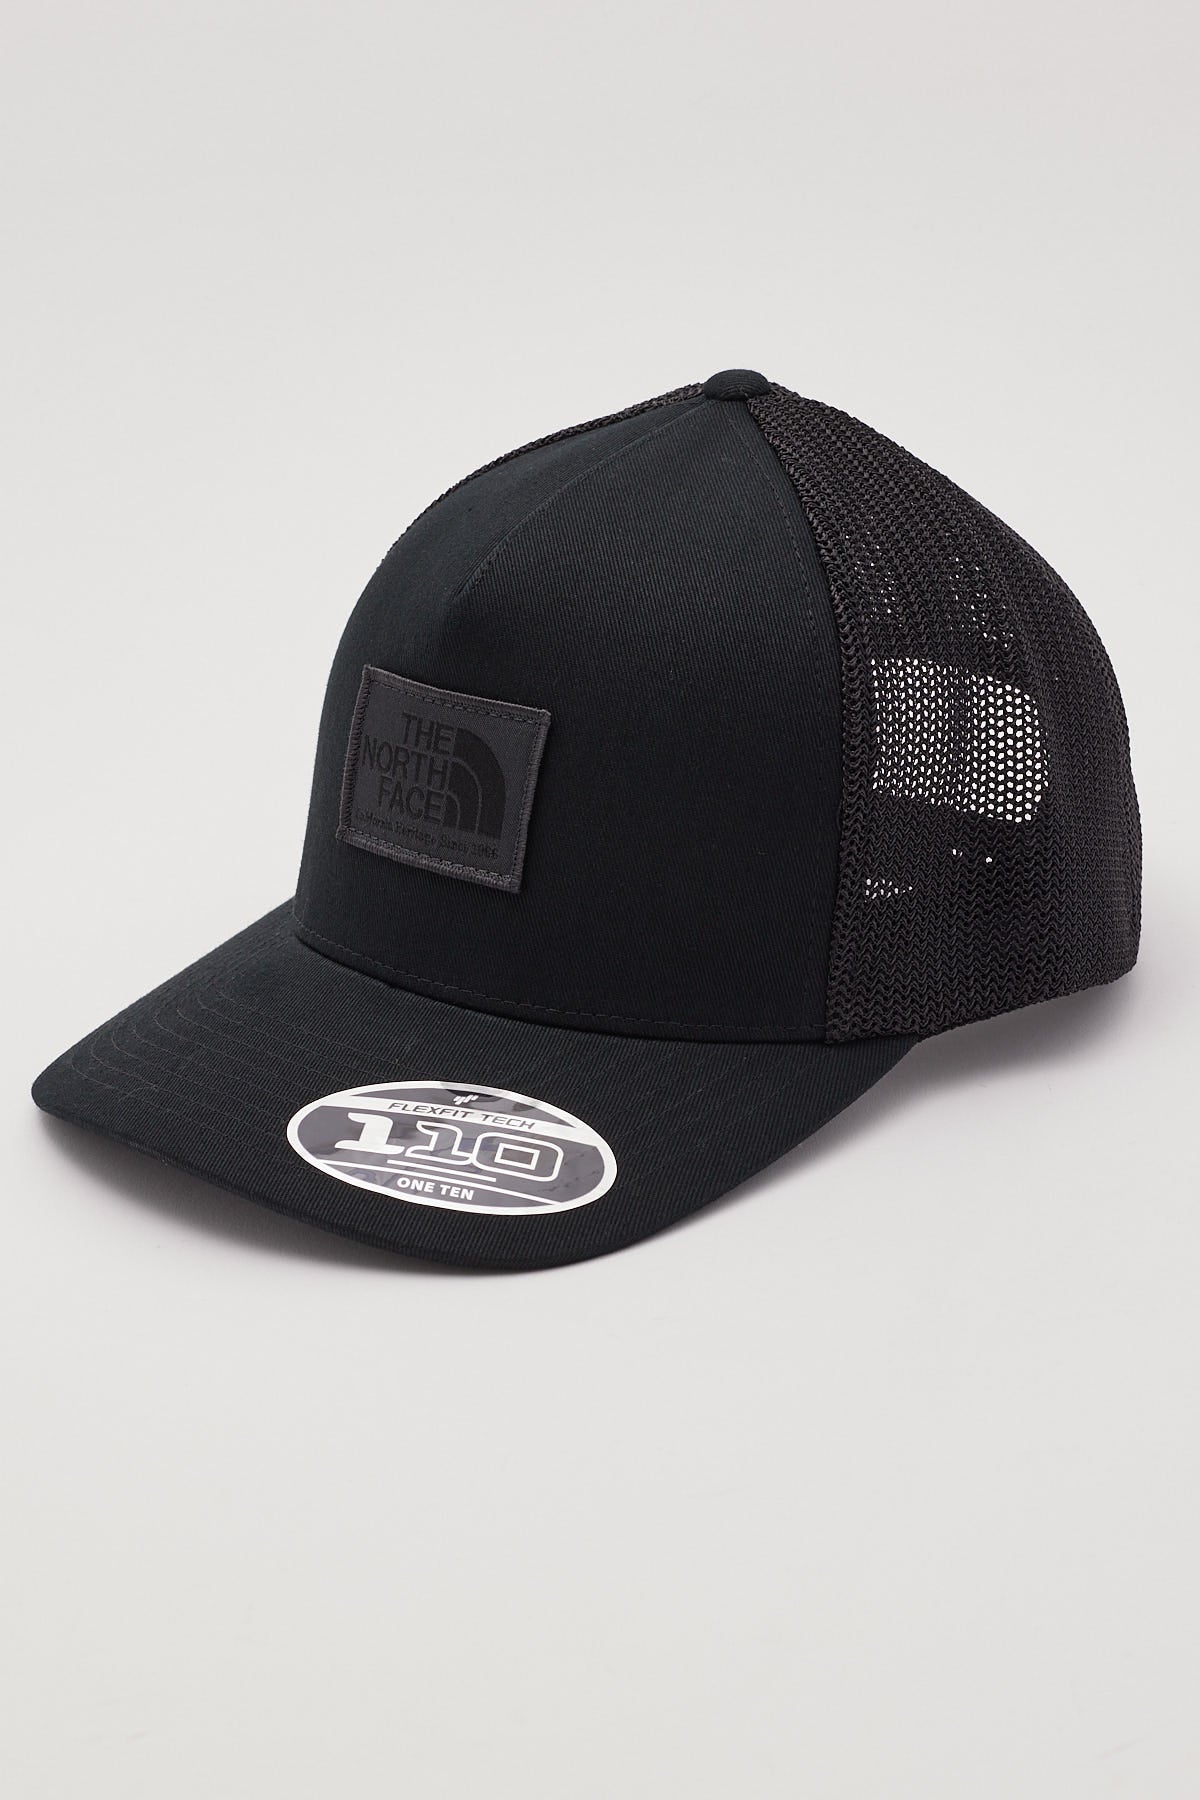 The North Face Keep It Patched Structured Trucker Black